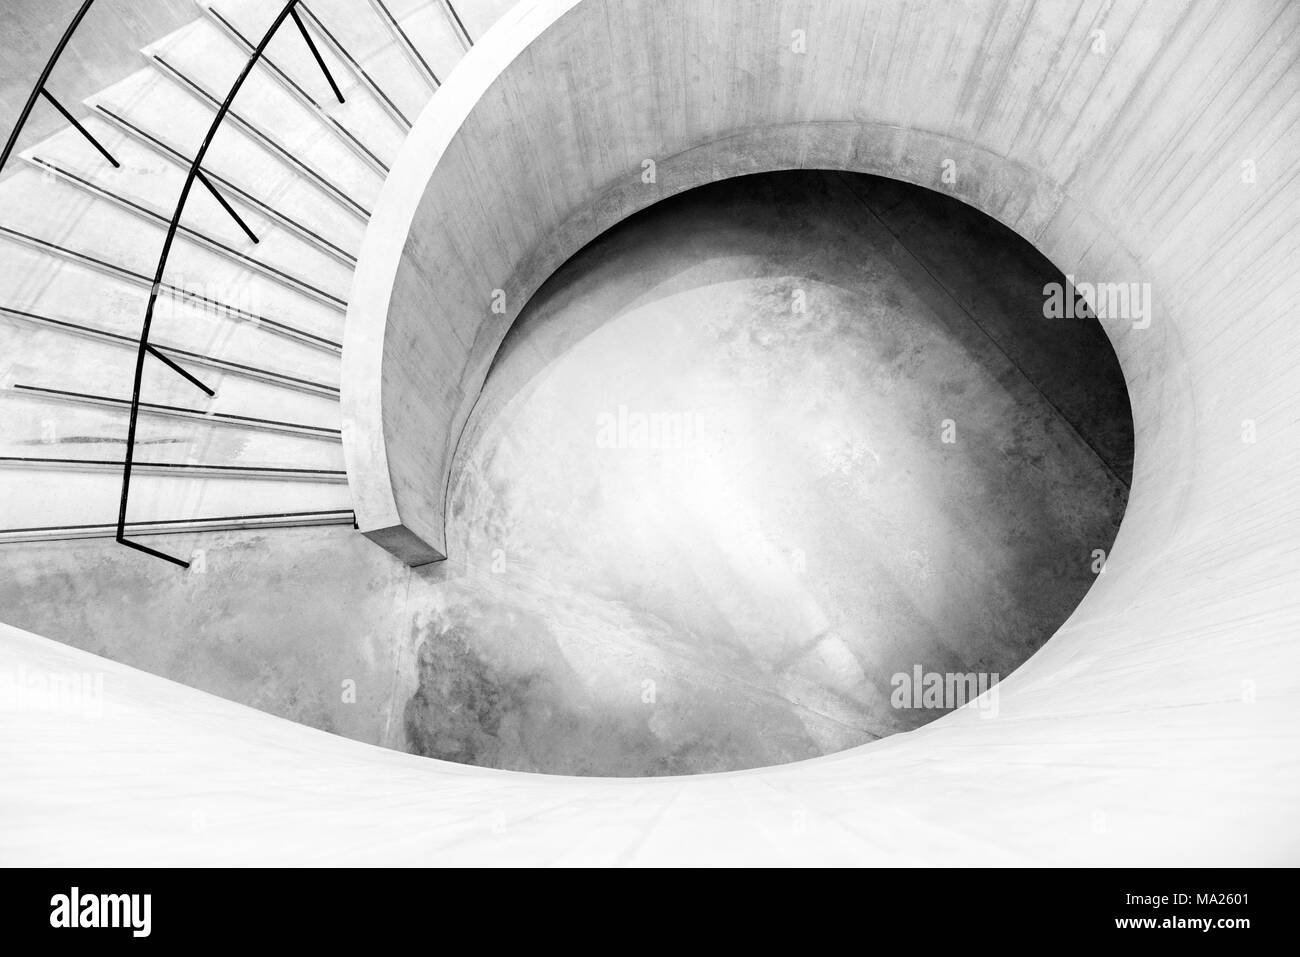 The concrete spiral staircase in Tate Modern, London, England Stock Photo